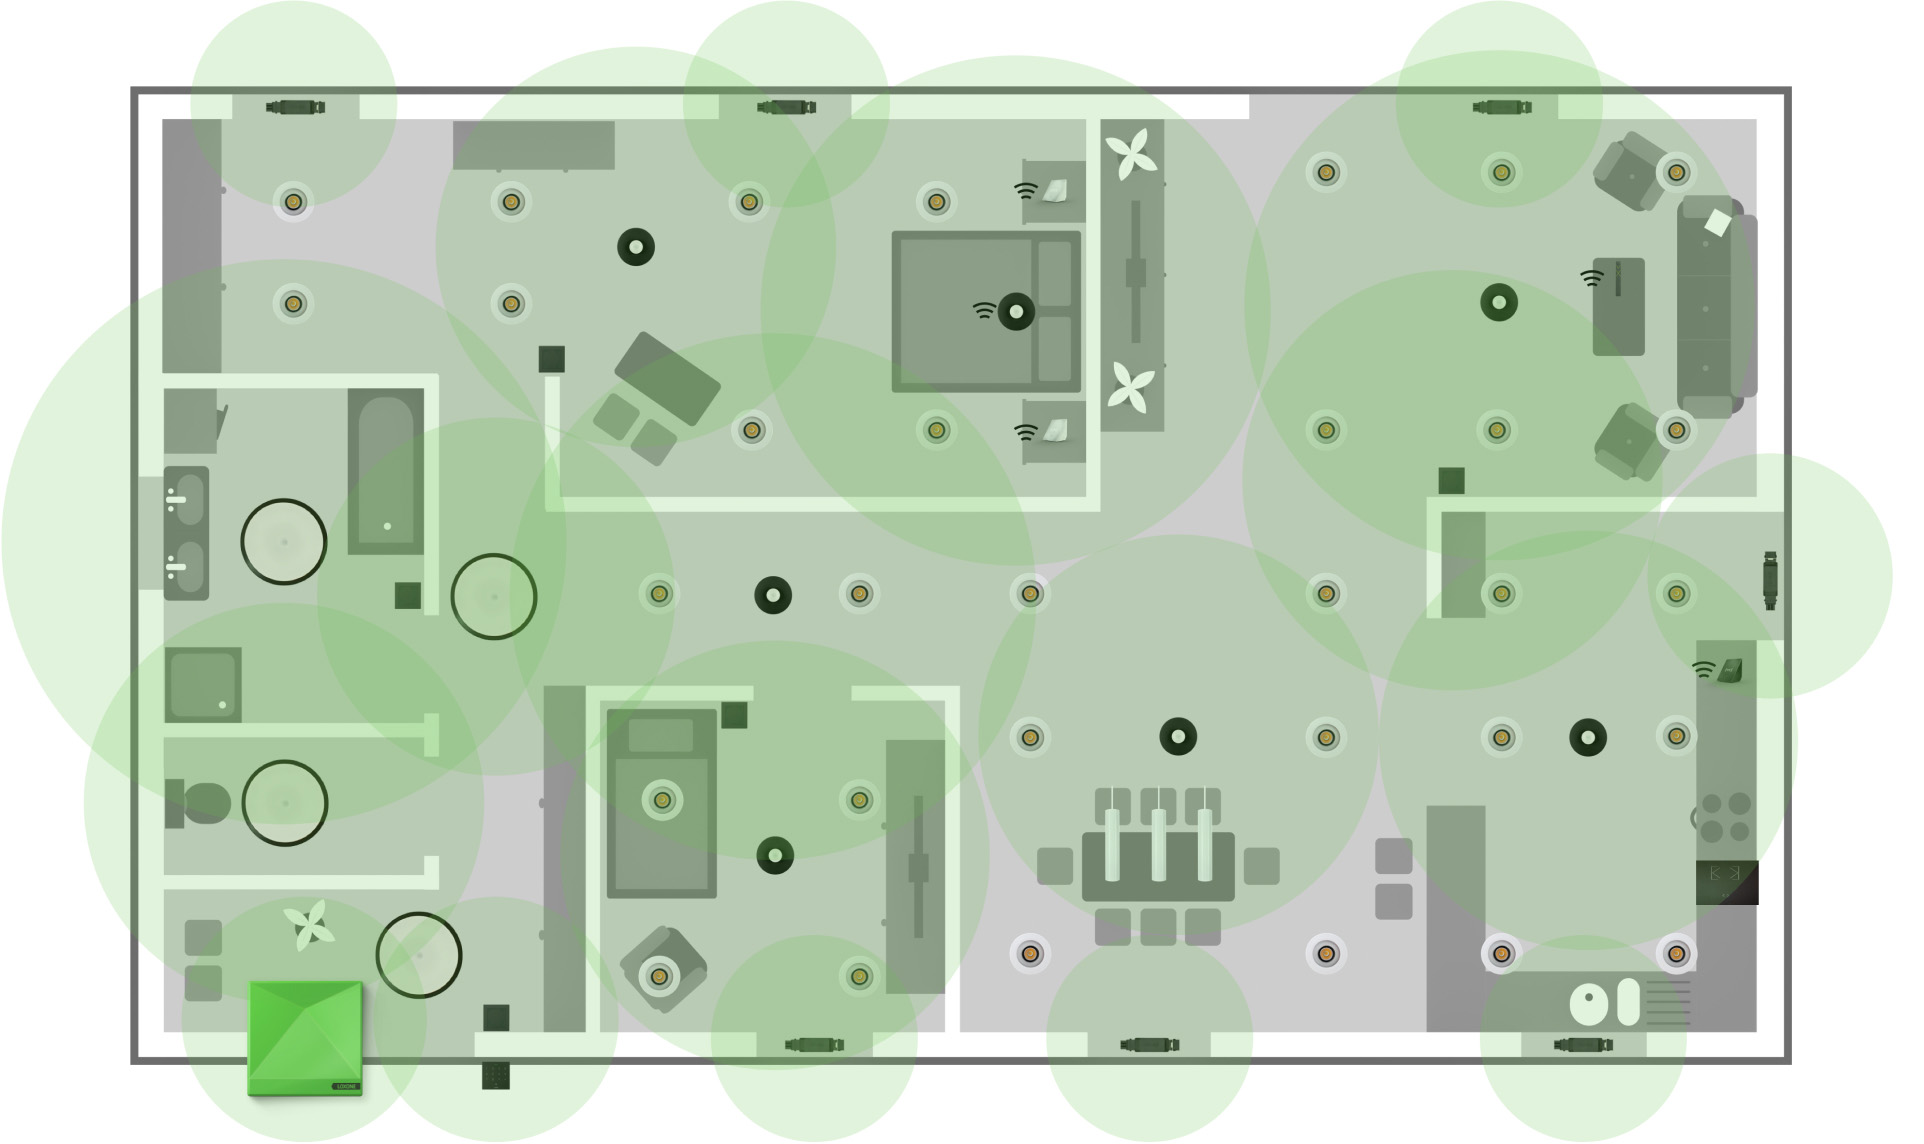 A floor plan of an apartment with Loxone Air mesh technology that connects the residential building automation system without wiring